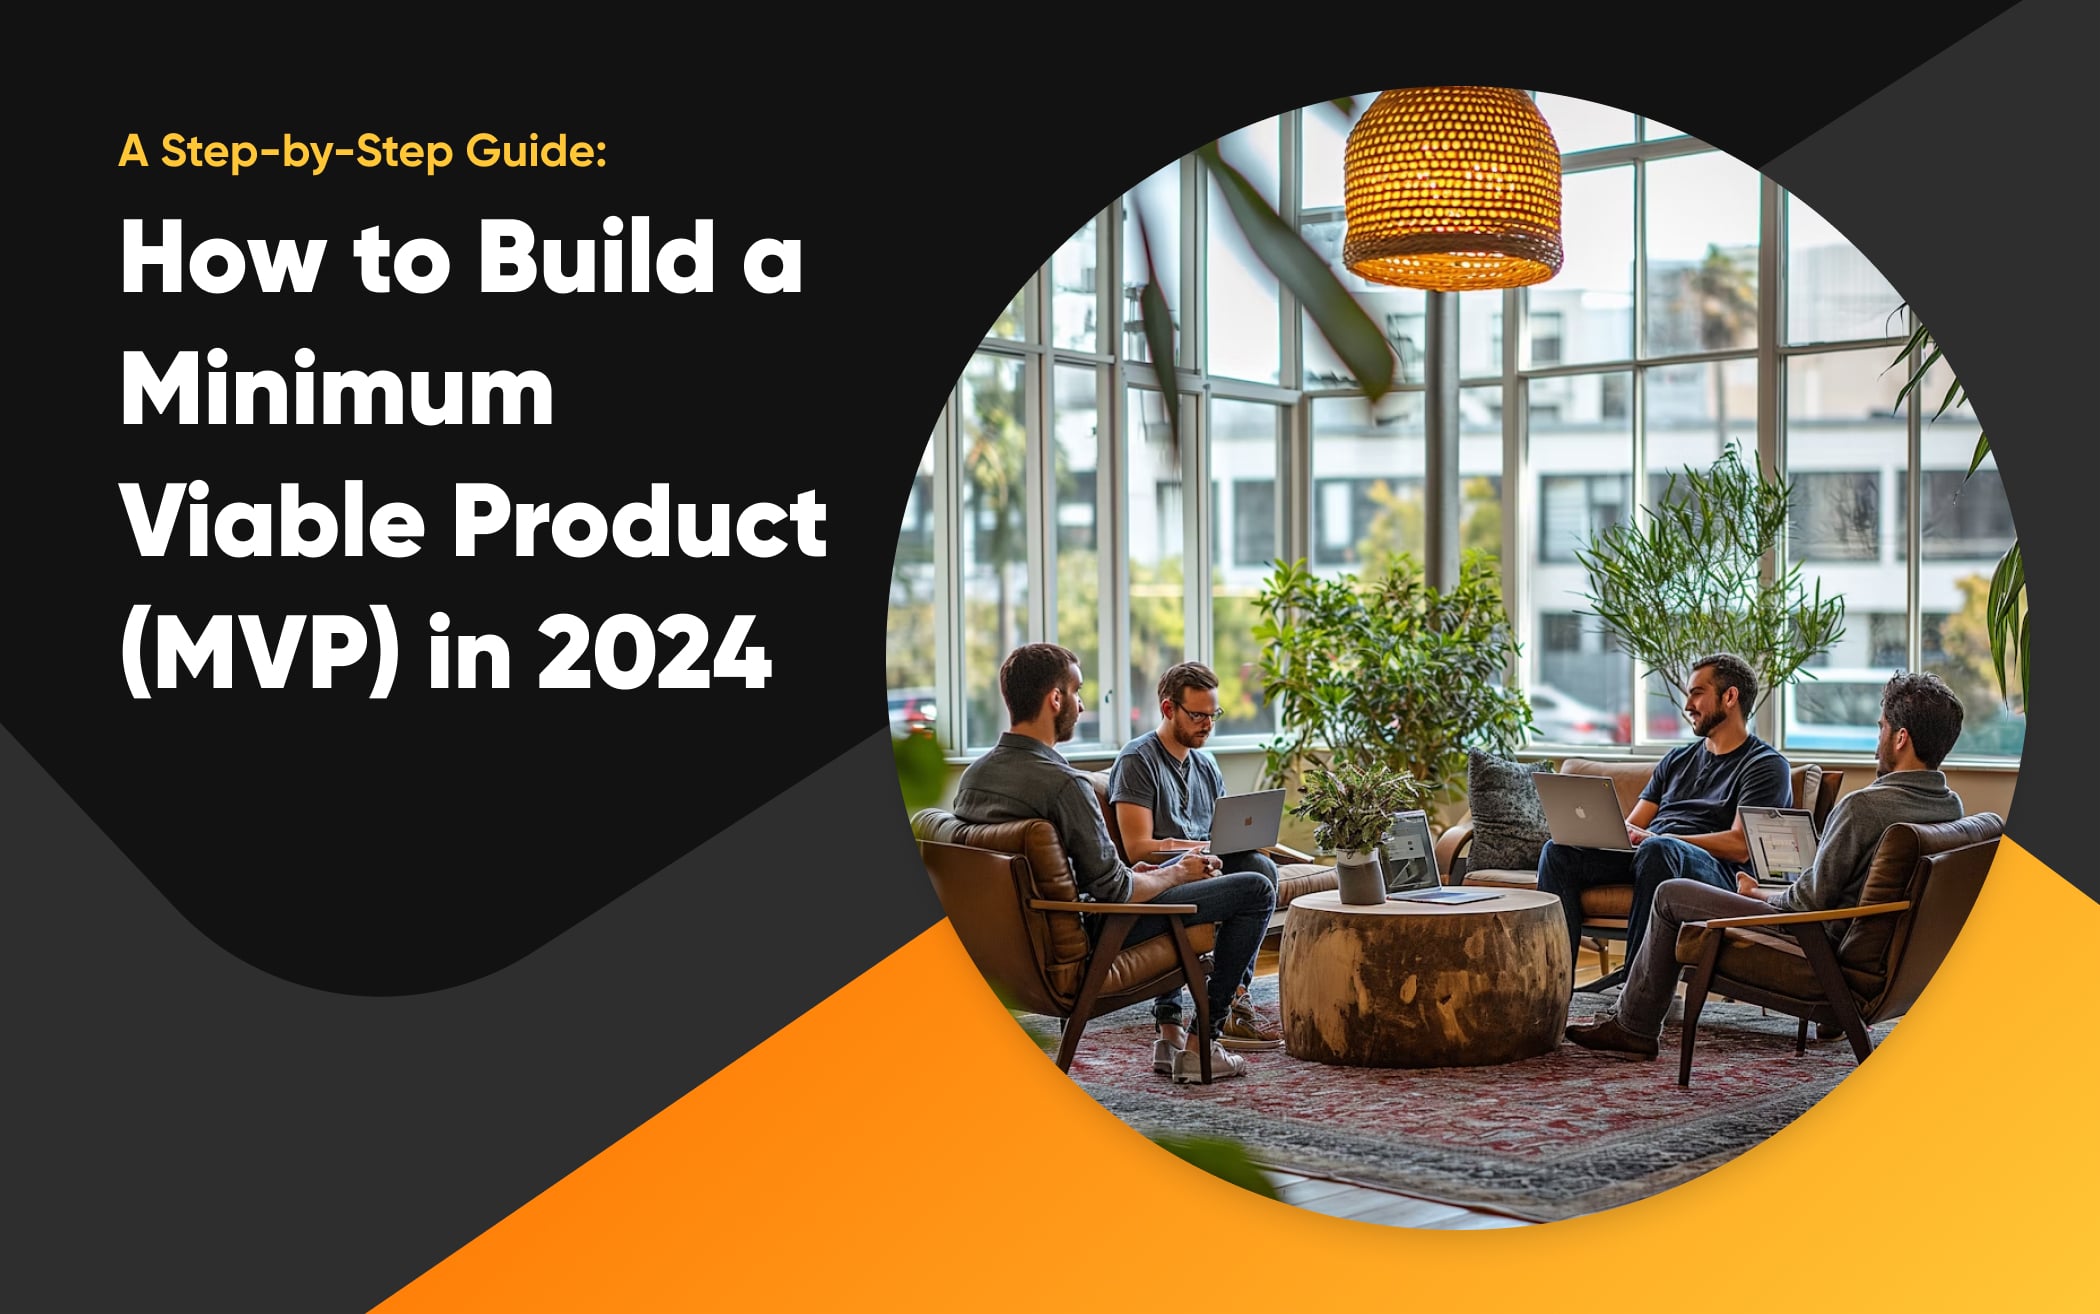 How to Build a Minimum Viable Product (MVP) in 2024: A Step-by-Step Guide